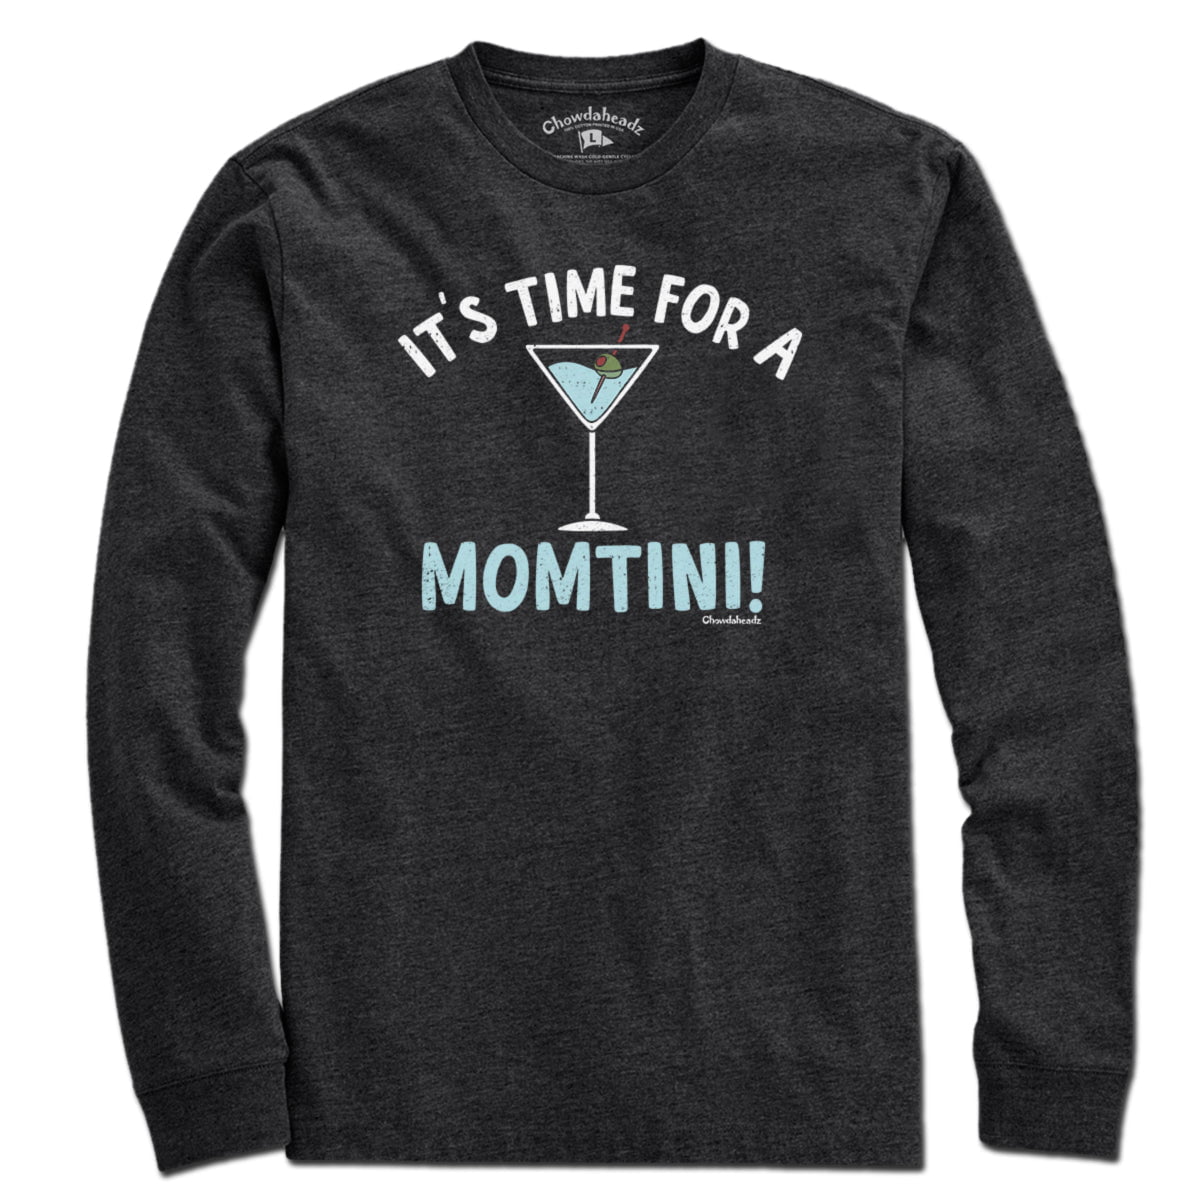 It's Time For a Momtini T-Shirt - Chowdaheadz